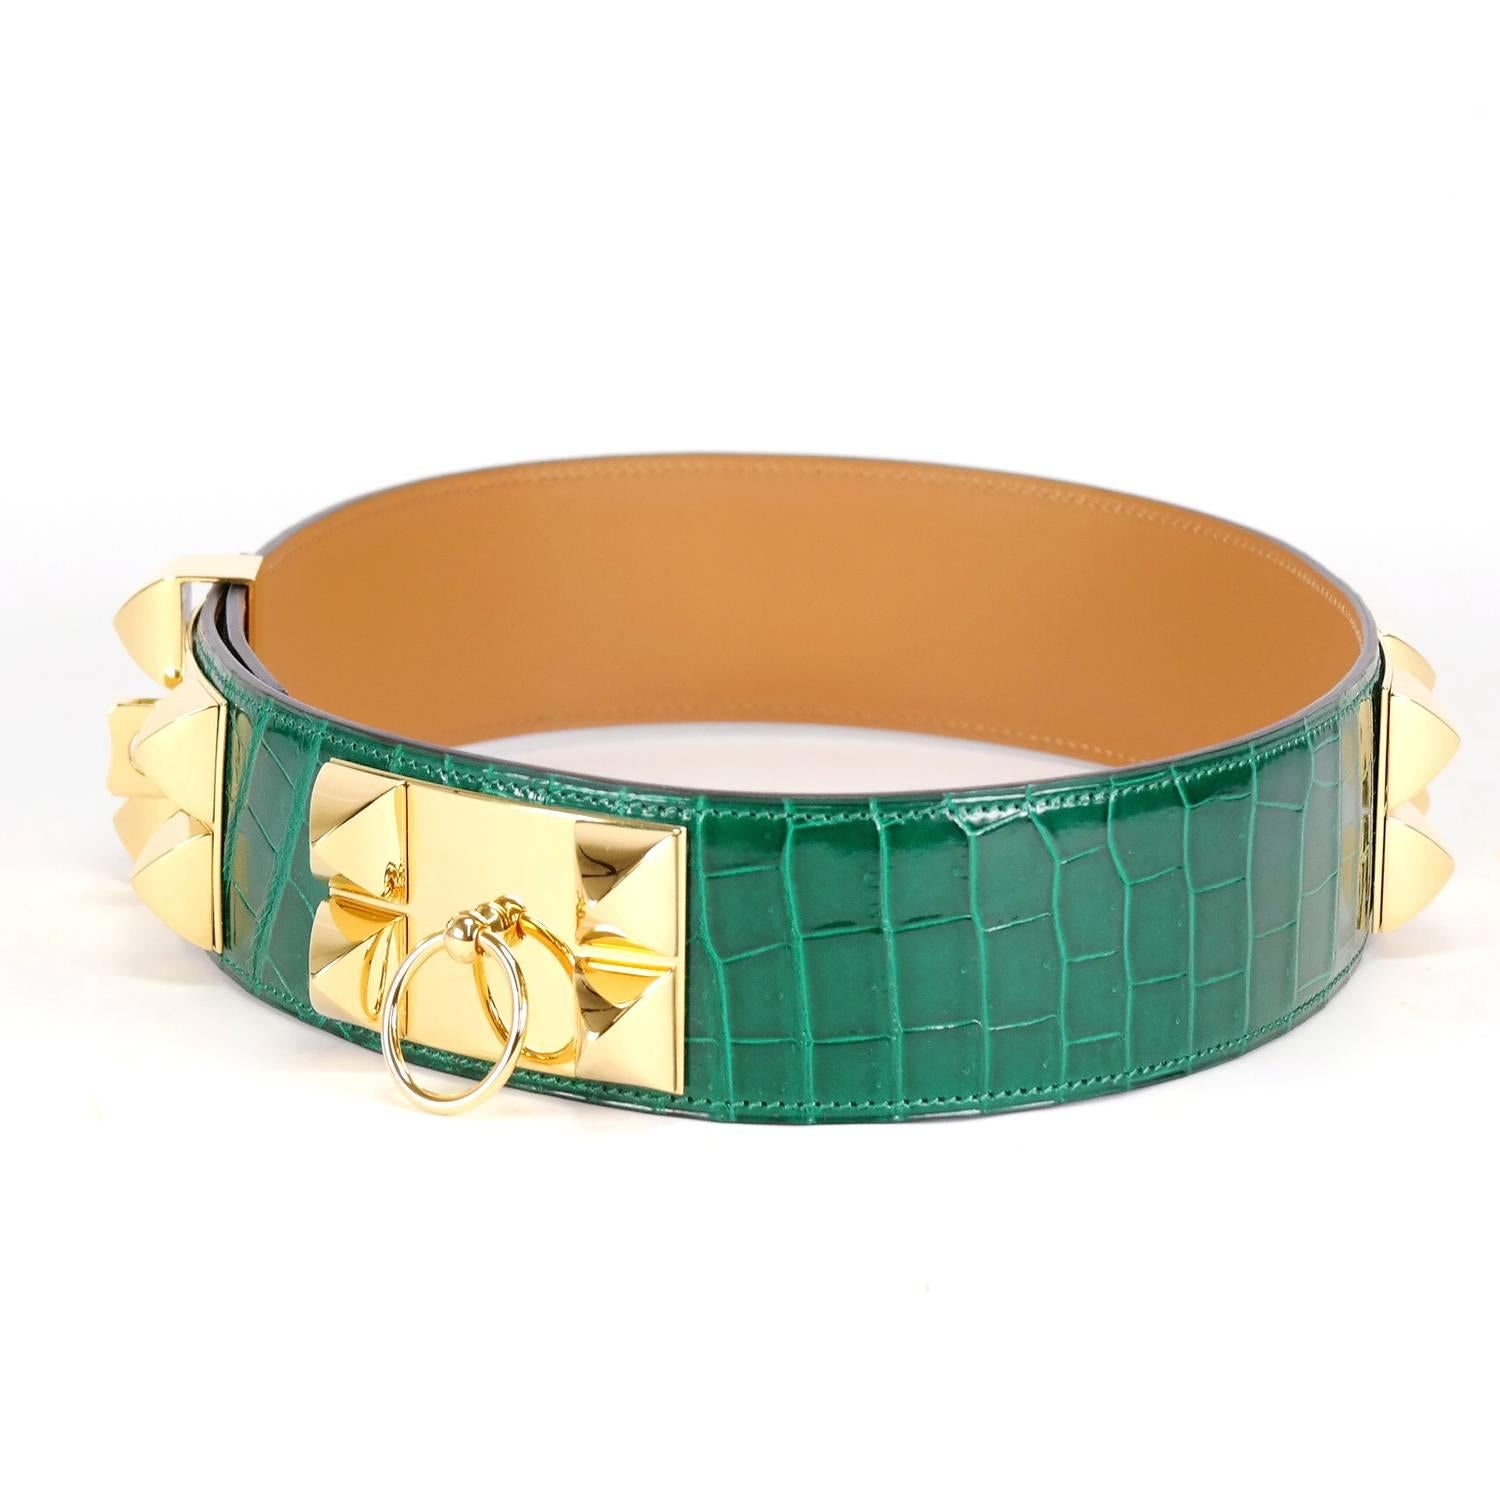 Hermes Woman Belt Dog Collar (CDC) Crocodile Leather 29.52 inch (75cm) Vert Emeraude Color 2014.

Pristine condition. Pre-owned and never used.

The price at Boutique Hermes is $ 7,500.00.

Bought it in Hermes store in 2014.

Model; Belt Dog Collar,